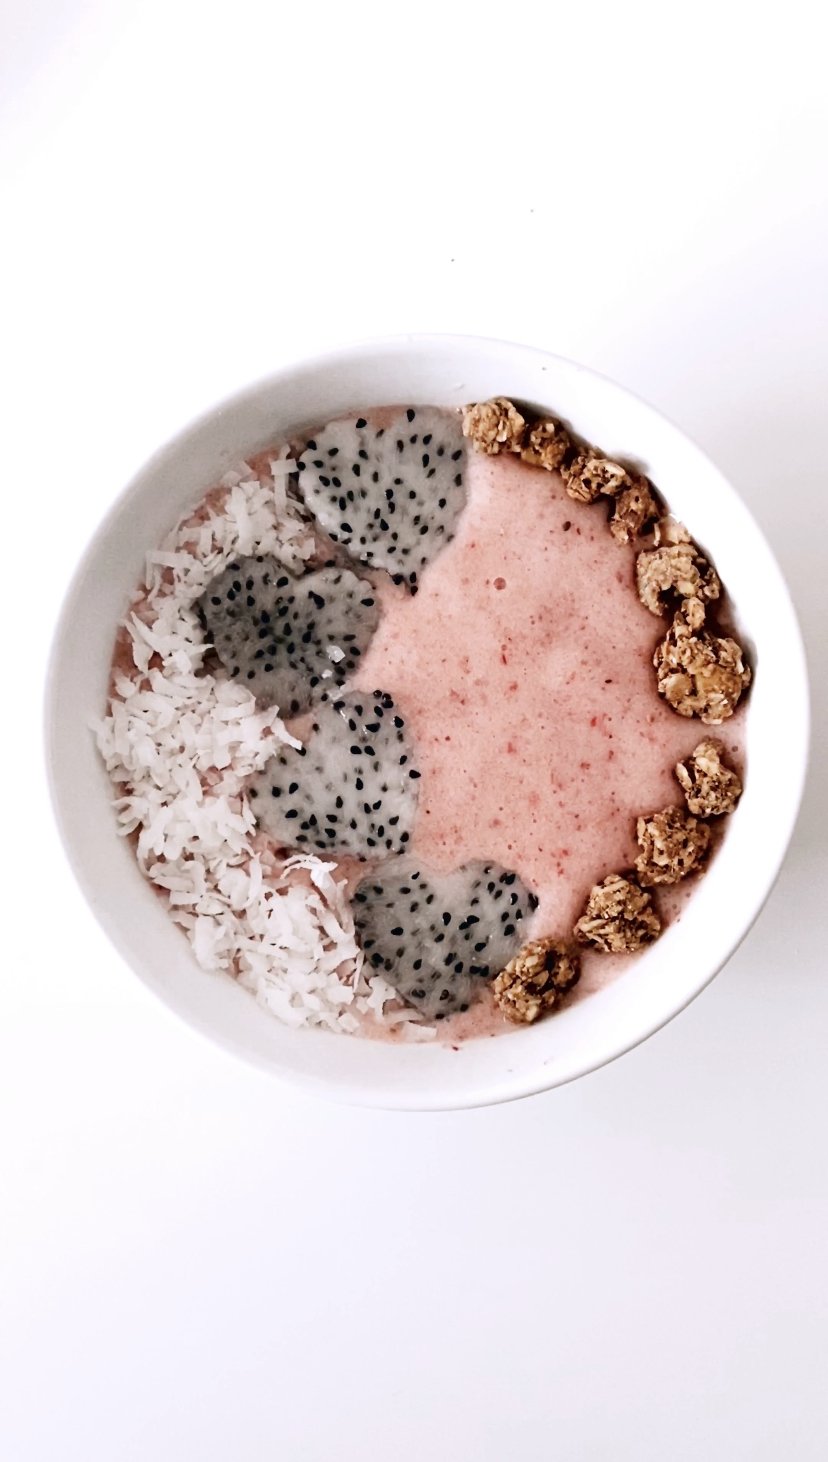 Collagen Smoothie Bowl with Heart-Shaped Dragon Fruit Slices